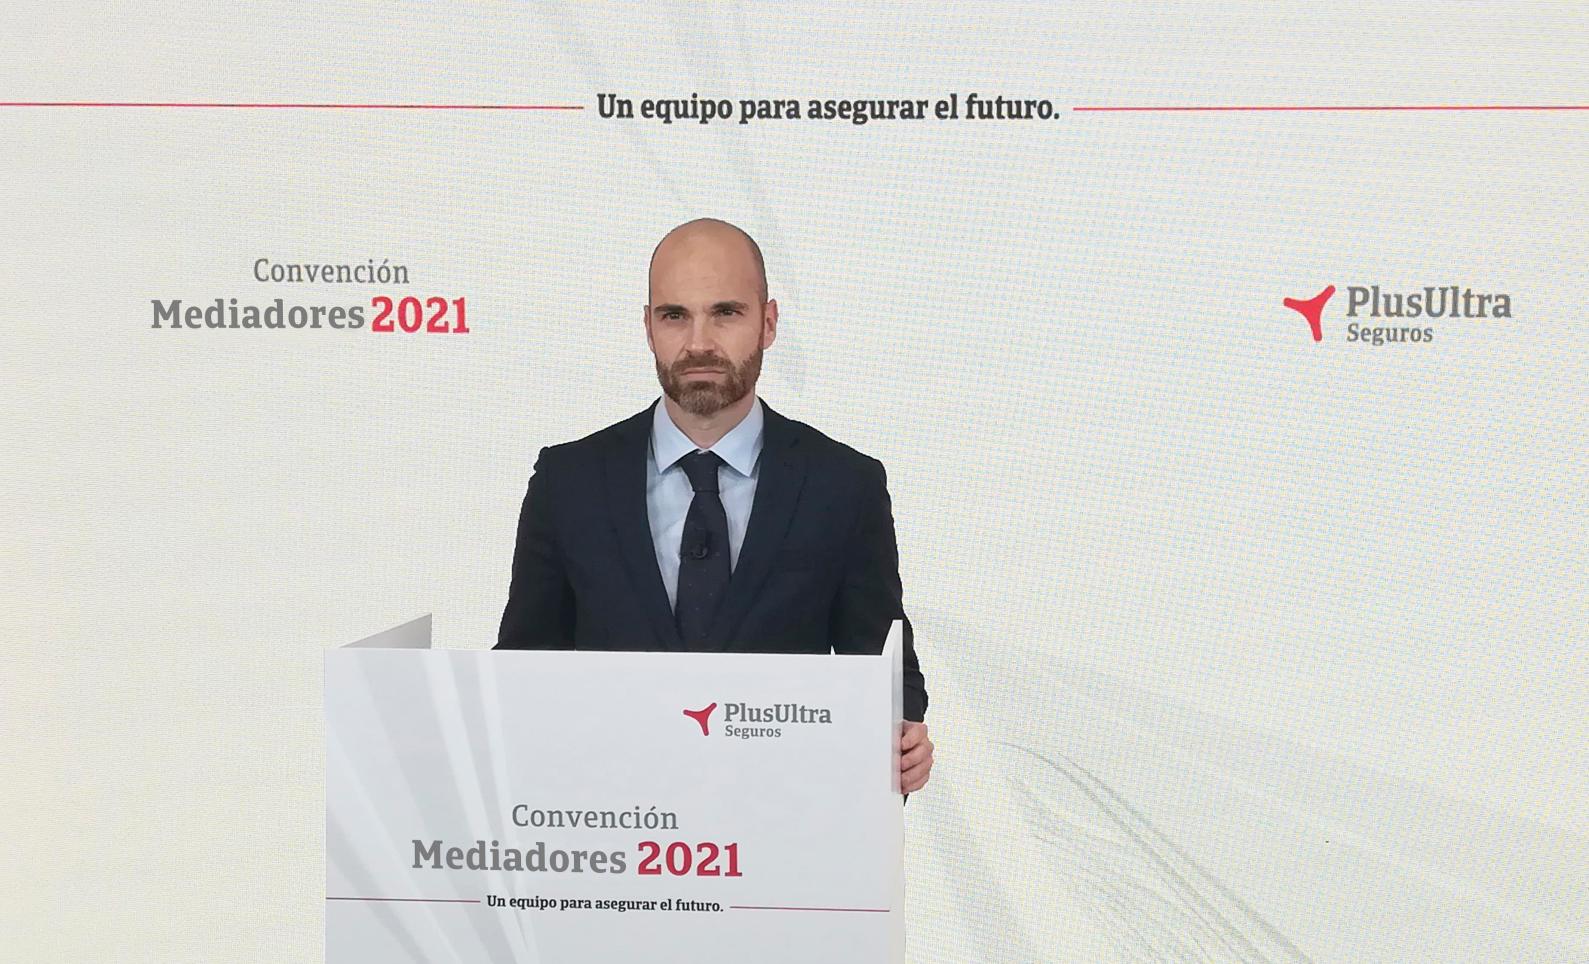 Plus Ultra Seguros presents its main strategic lines for 2021 to its mediation network